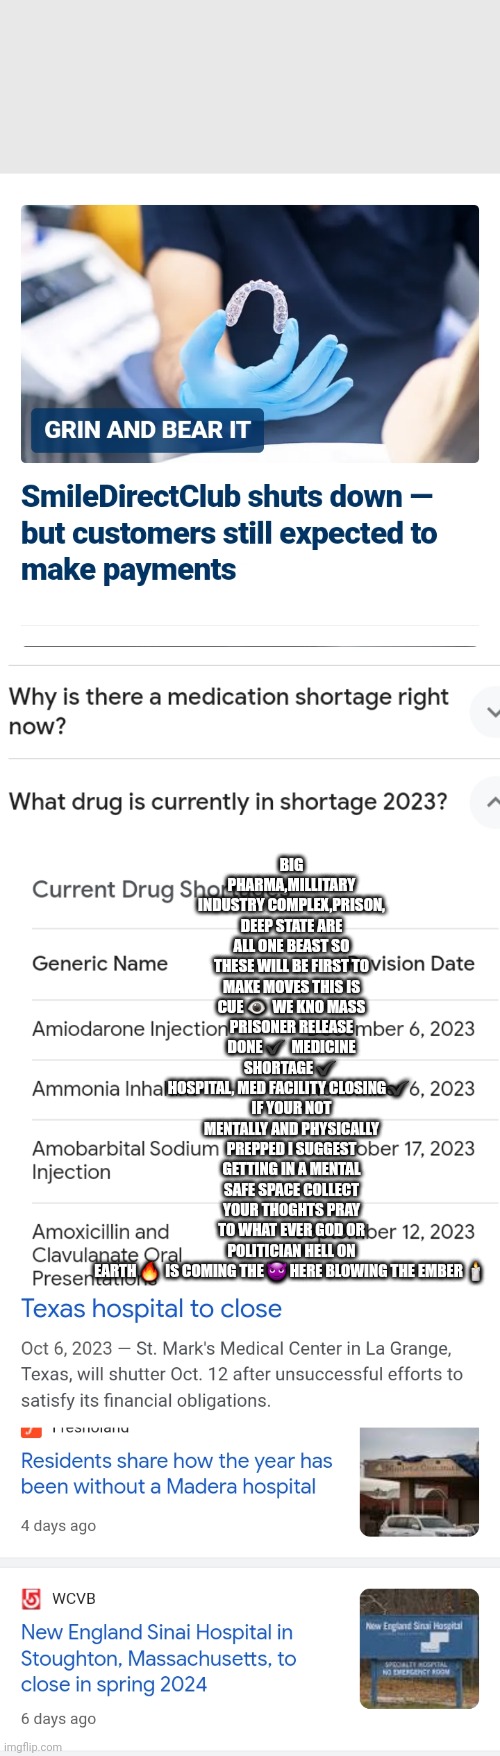 2024 fail | BIG PHARMA,MILLITARY INDUSTRY COMPLEX,PRISON, DEEP STATE ARE ALL ONE BEAST SO THESE WILL BE FIRST TO MAKE MOVES THIS IS CUE 👁  WE KNO MASS PRISONER RELEASE DONE ✔  MEDICINE SHORTAGE ✔ 
HOSPITAL, MED FACILITY CLOSING ✔  
IF YOUR NOT MENTALLY AND PHYSICALLY PREPPED I SUGGEST GETTING IN A MENTAL SAFE SPACE COLLECT YOUR THOGHTS PRAY TO WHAT EVER GOD OR POLITICIAN HELL ON EARTH 🔥  IS COMING THE 😈 HERE BLOWING THE EMBER 🕯 | image tagged in fail,dr fauci,alex jones,aint nobody got time for that,new years | made w/ Imgflip meme maker